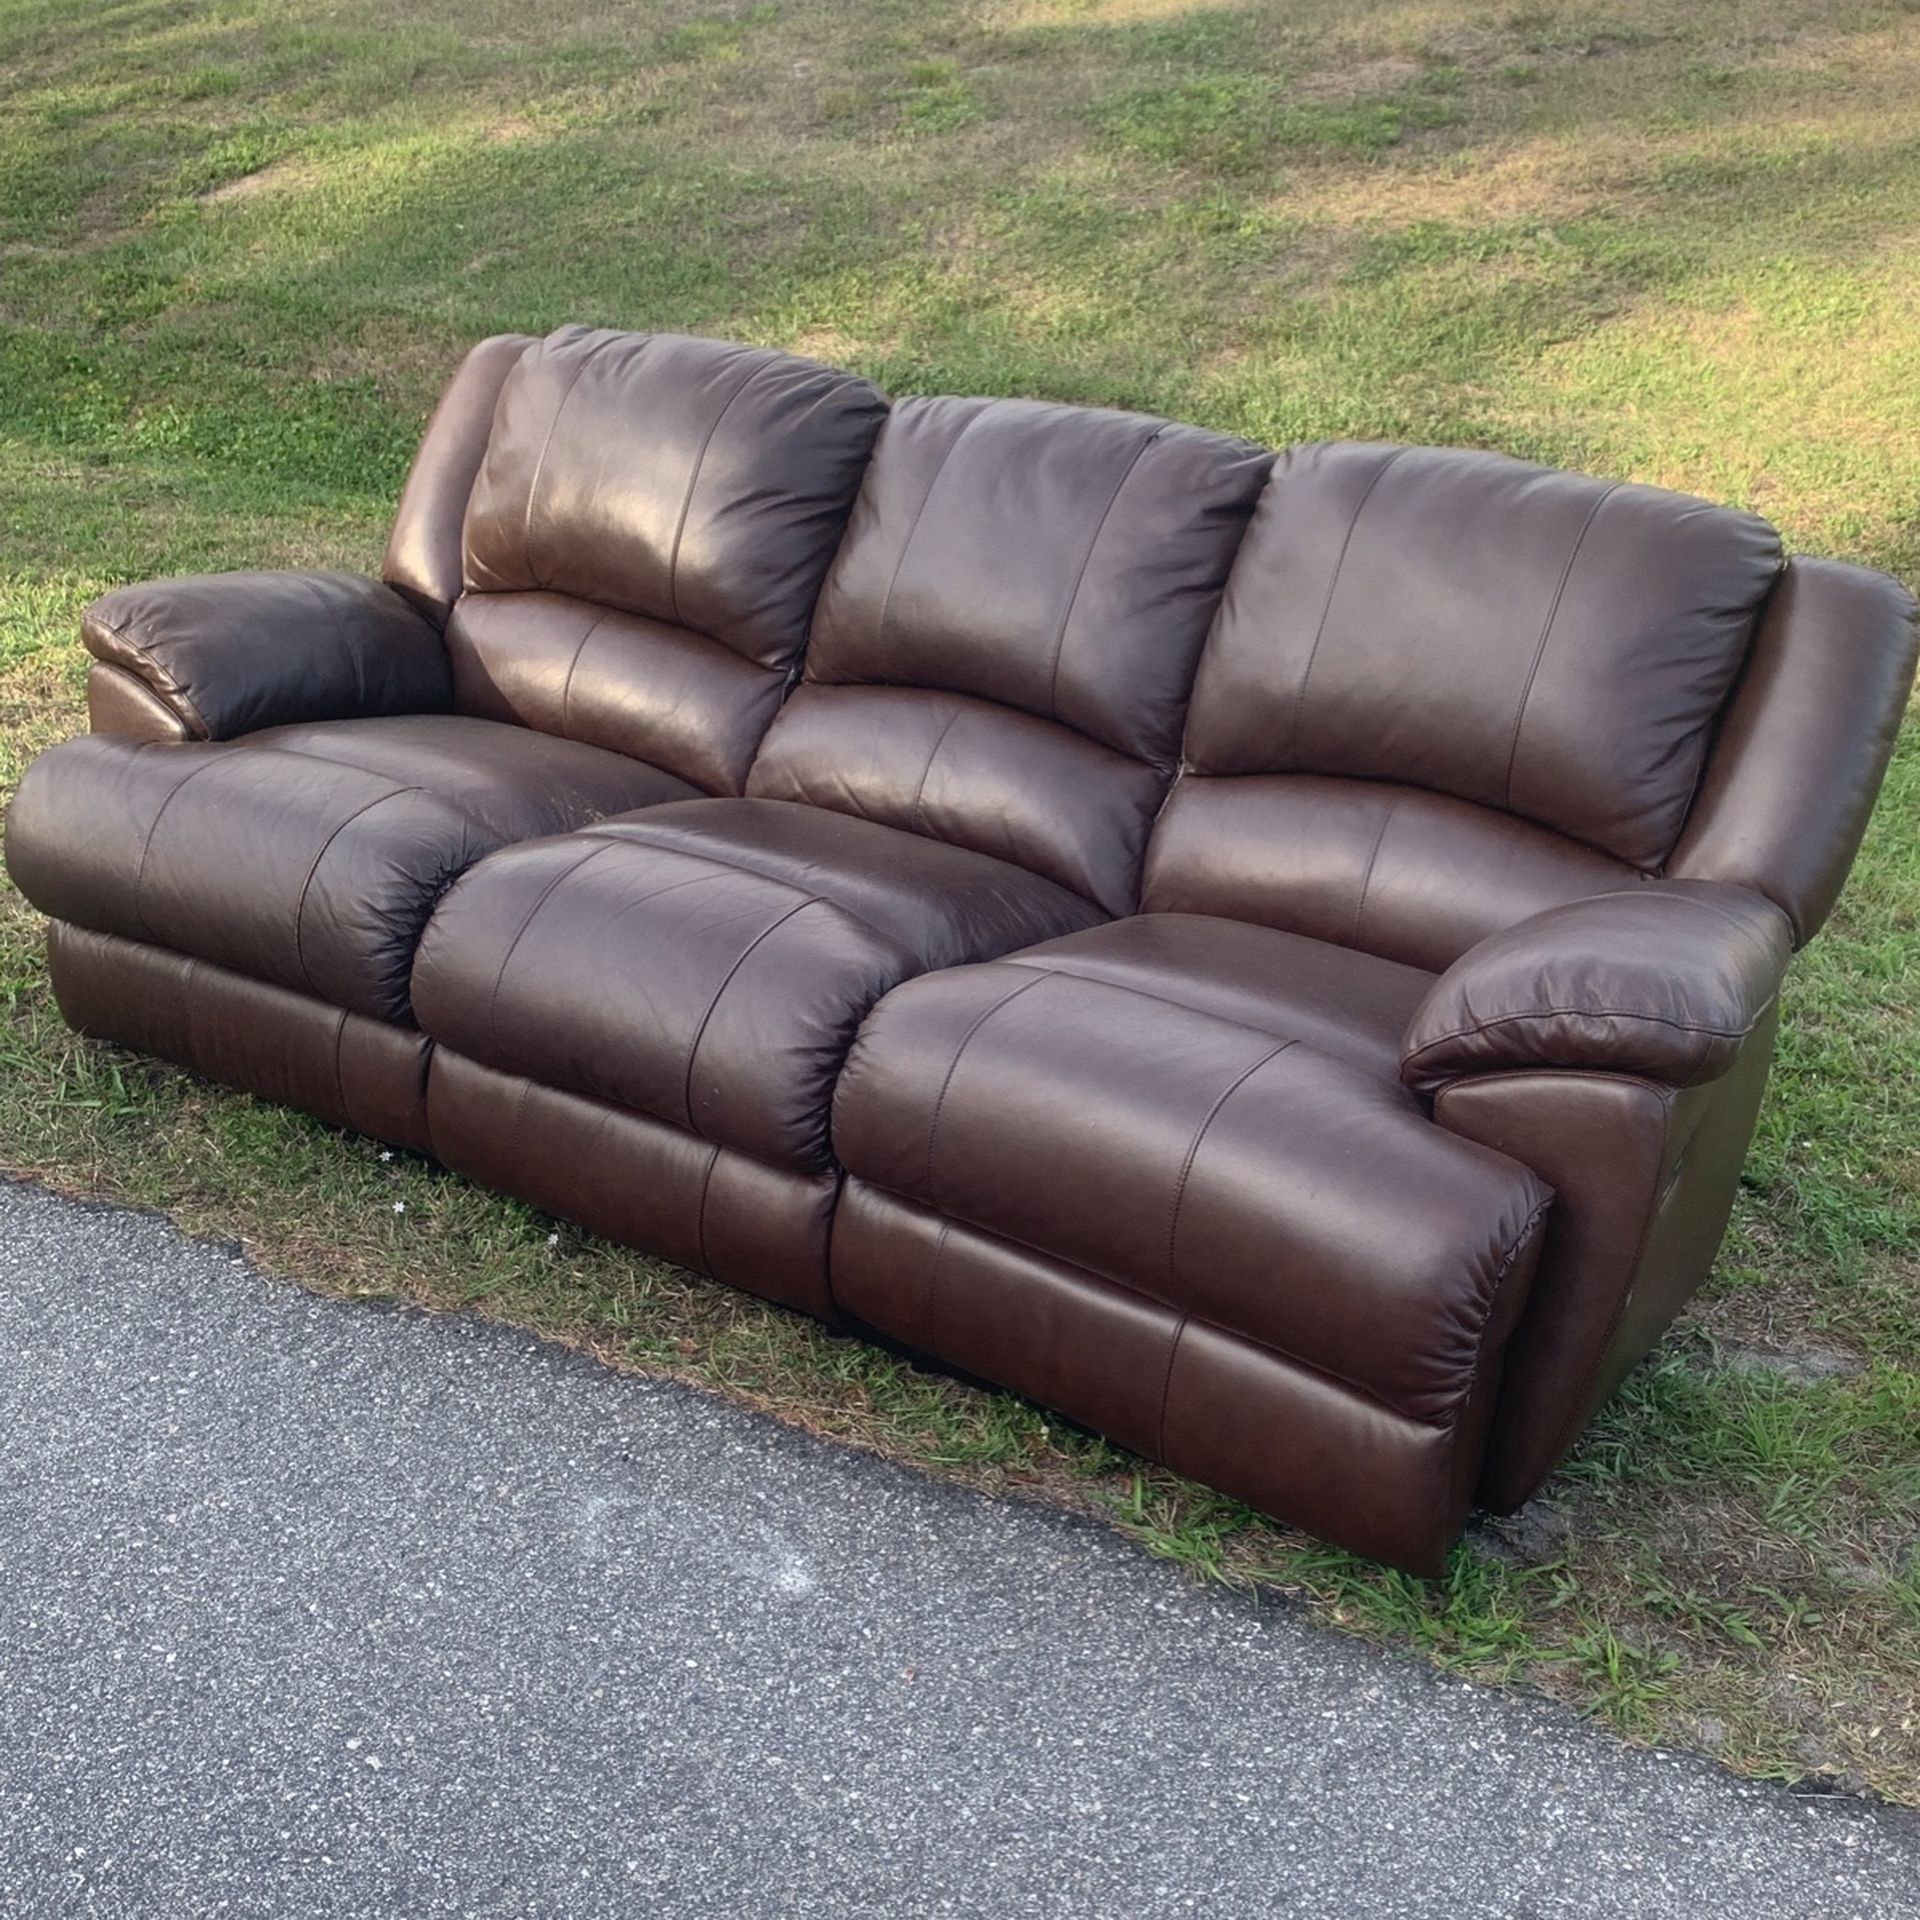 Free Leather Couch!!